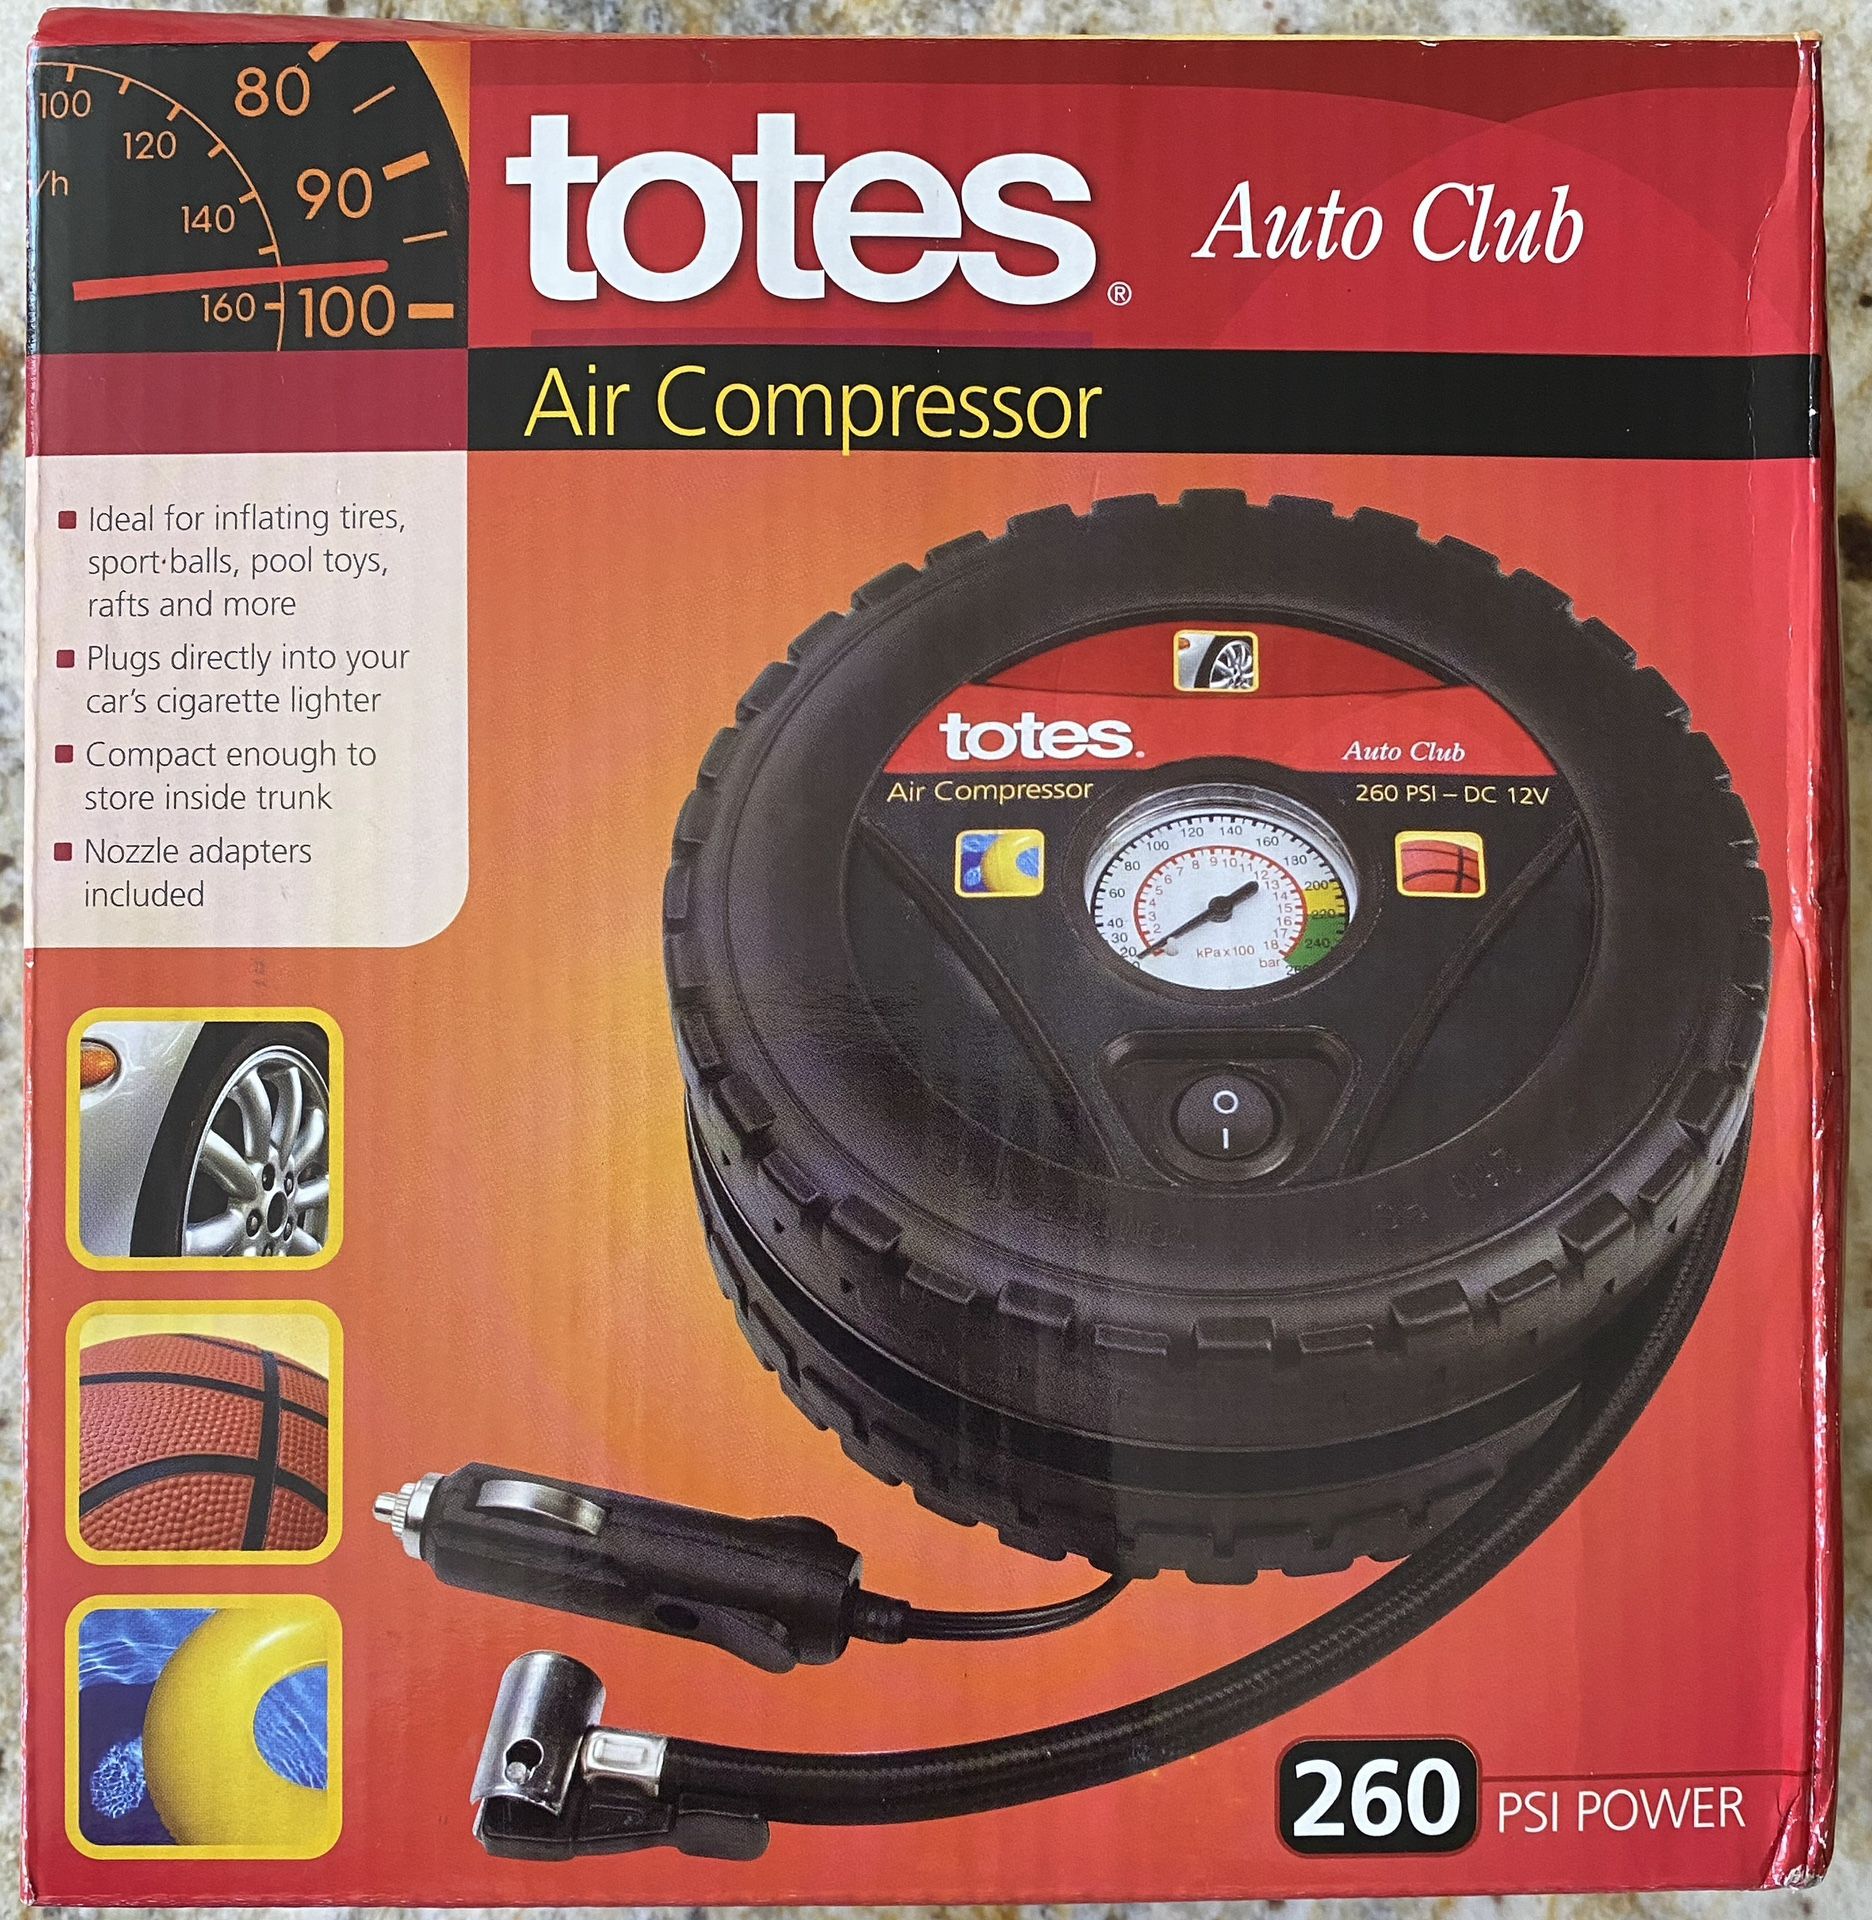 AIR COMPRESSOR - TOTES AUTO CLUB AIR COMPRESSOR 260 PSI POWER WITH BUILT IN PRESSURE GAUGE – MODEL 71792J8-01 – BRAND NEW FACTORY SEALED BOX